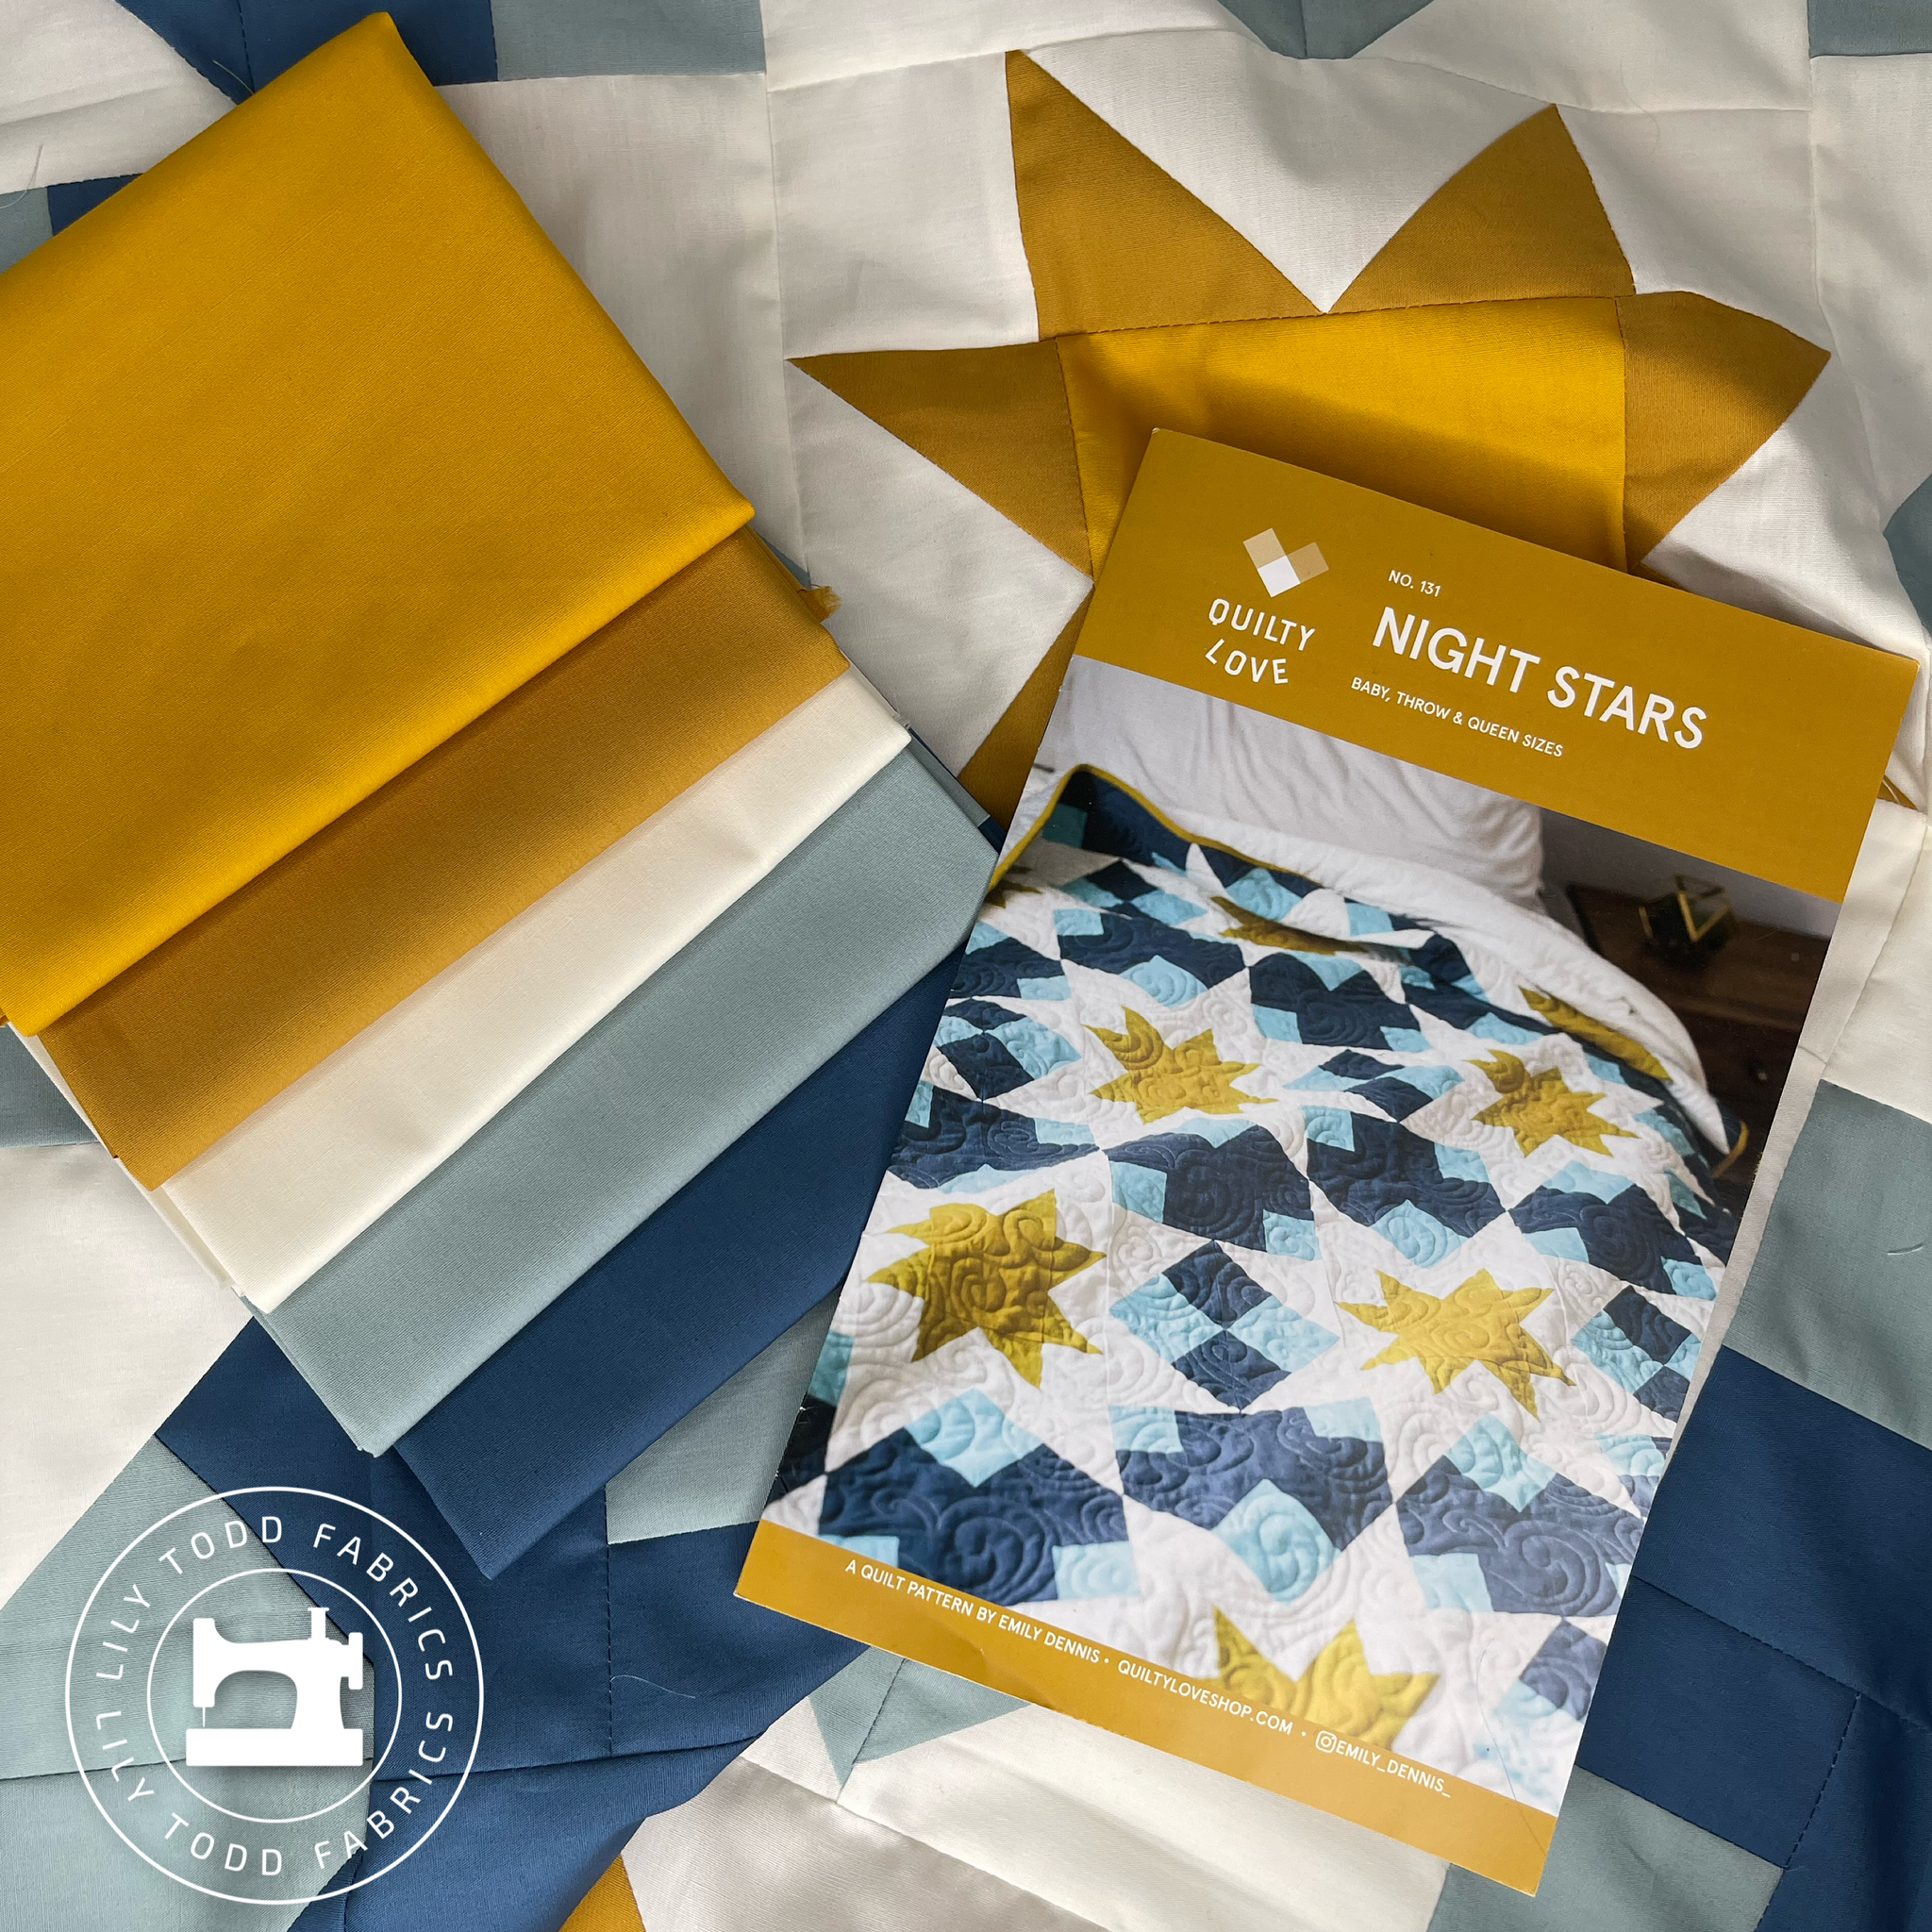 Night Stars Quilt Kit - Quilty Love - Throw